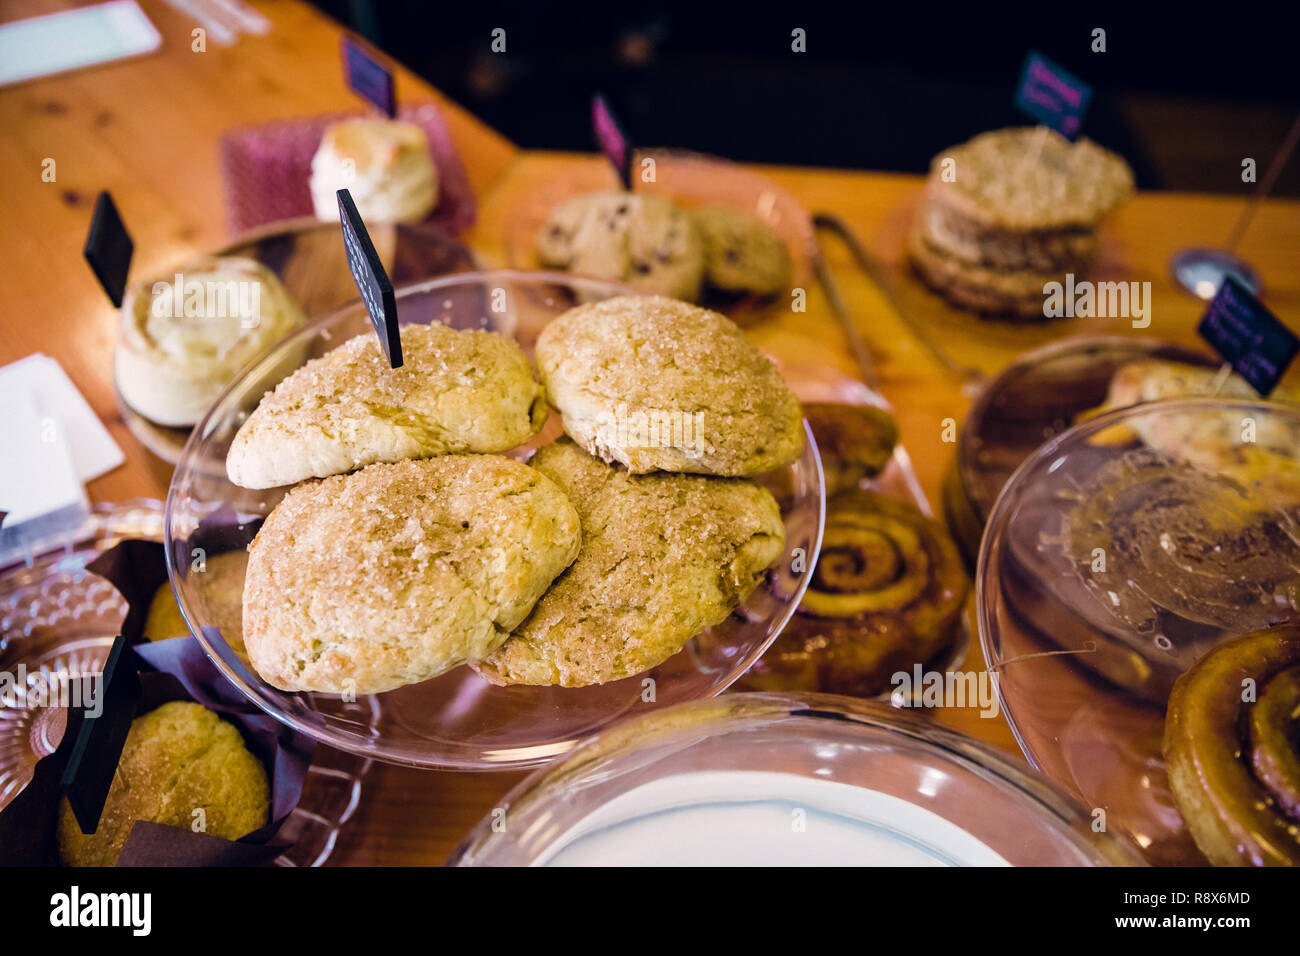 Handmade Scones at Coffee Shop Featuring Bakery Items Stock Photo